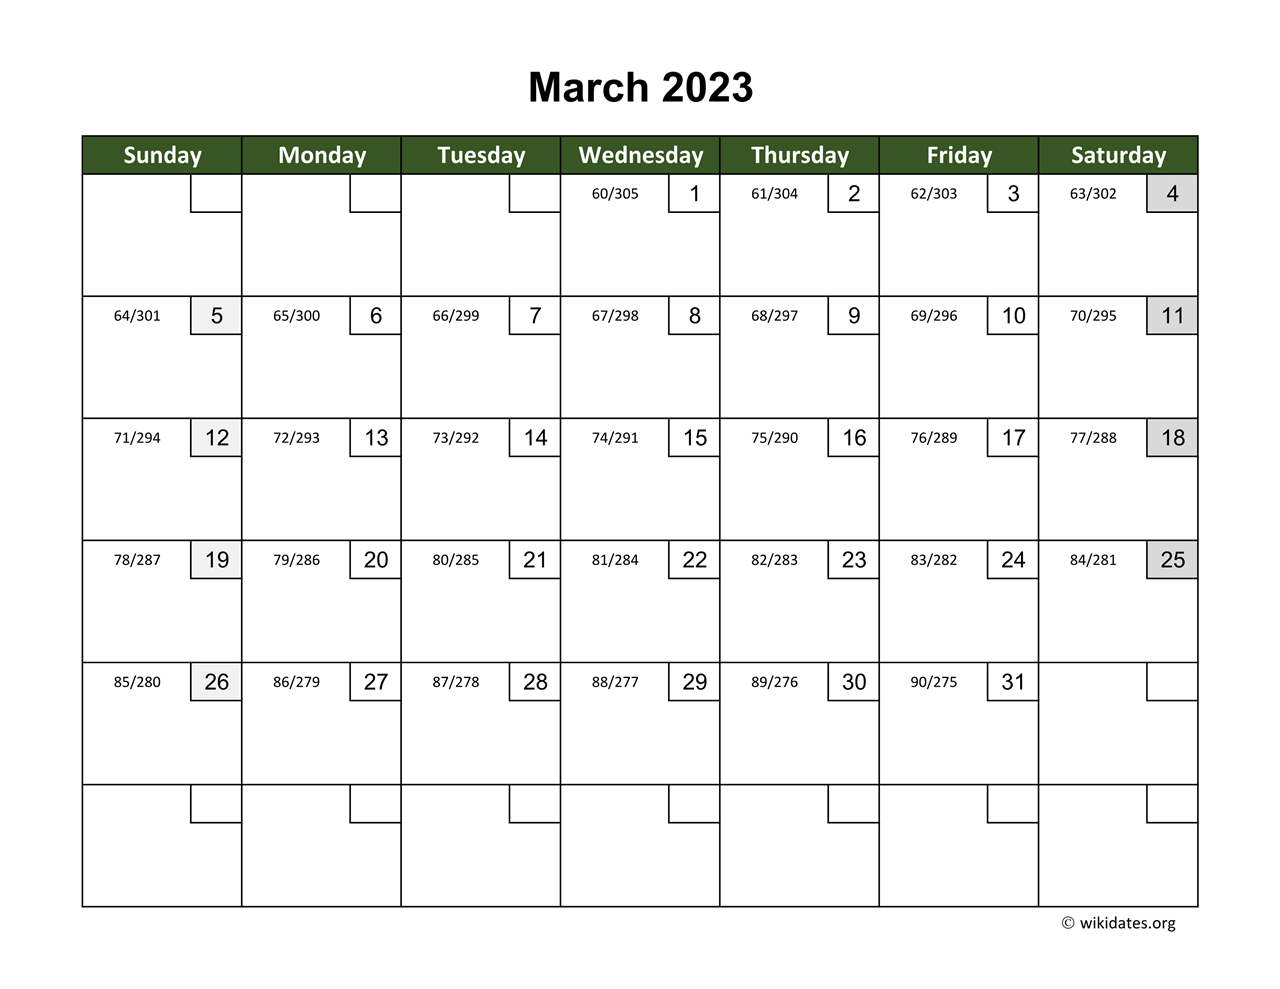 March 2023 Calendar with Day Numbers | WikiDates.org